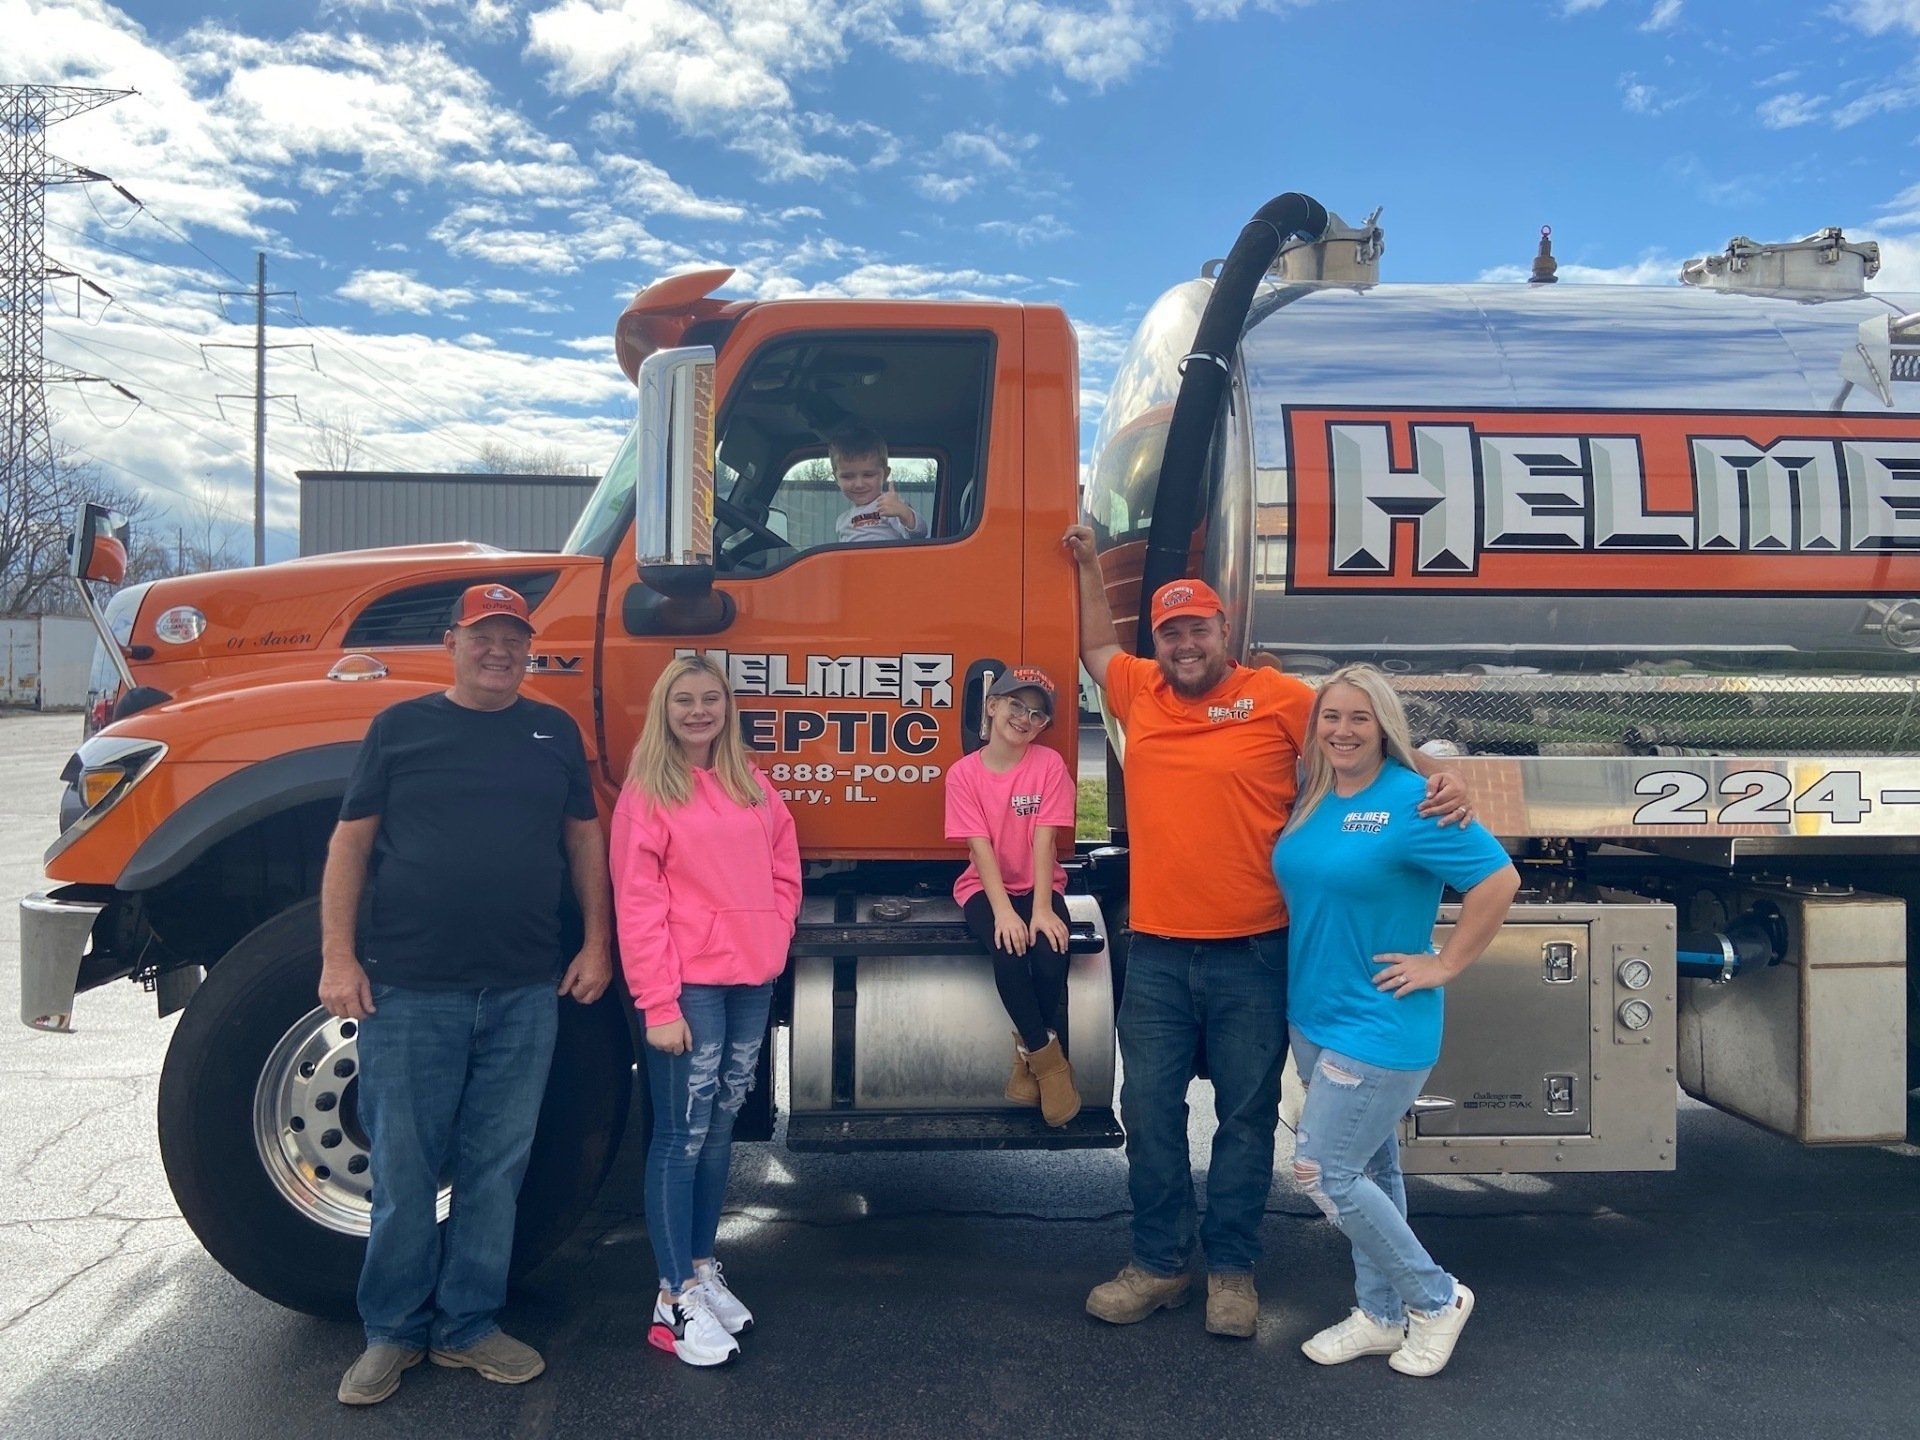 Helmer Septic Family Owned